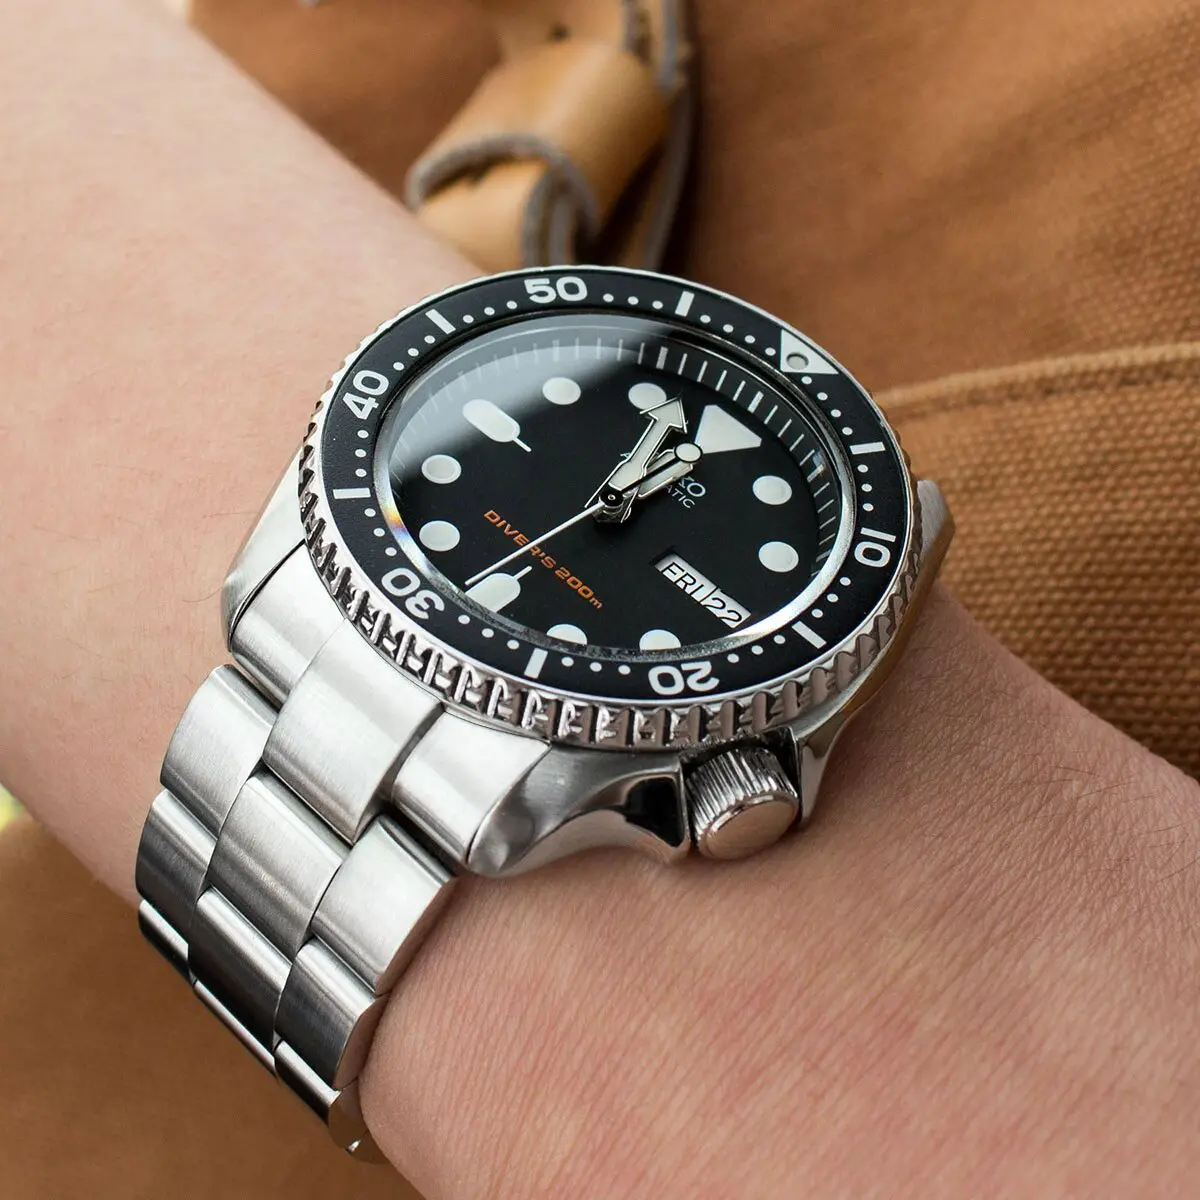 An SKX007 with a double dome sapphire crystal